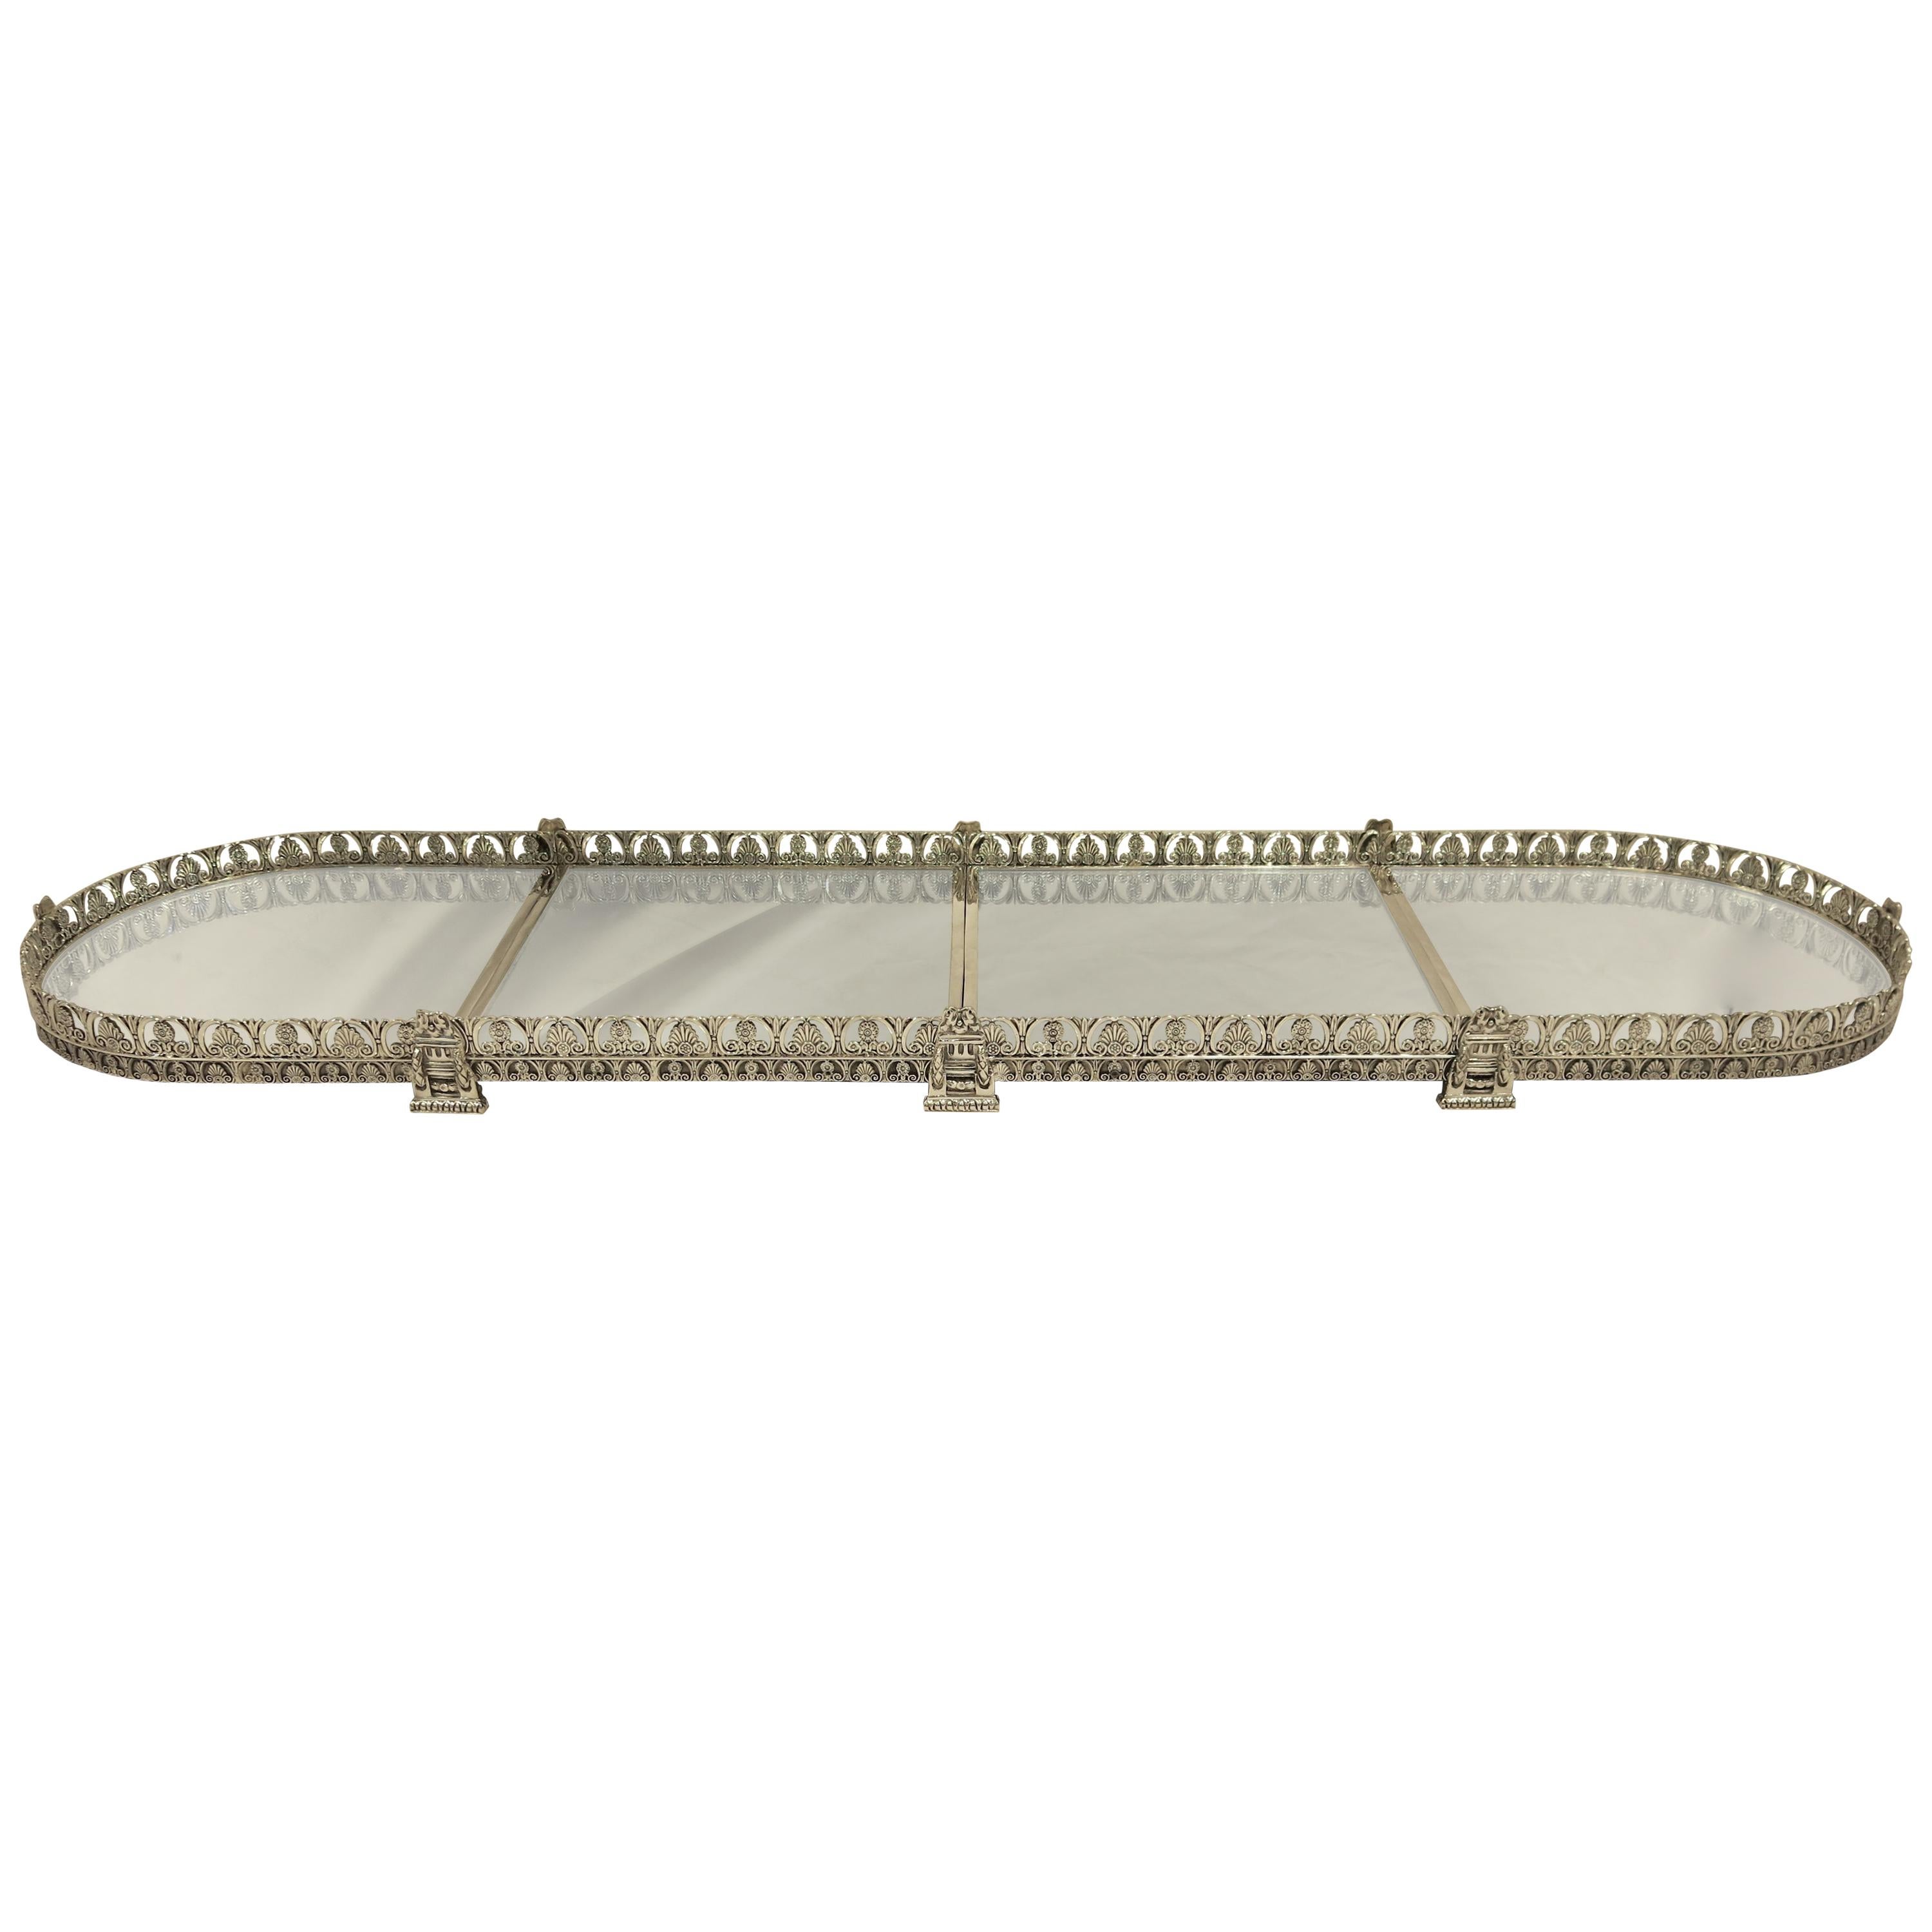 Four-Section Mirrored Top Table Plateau or Surtout De Table For Sale